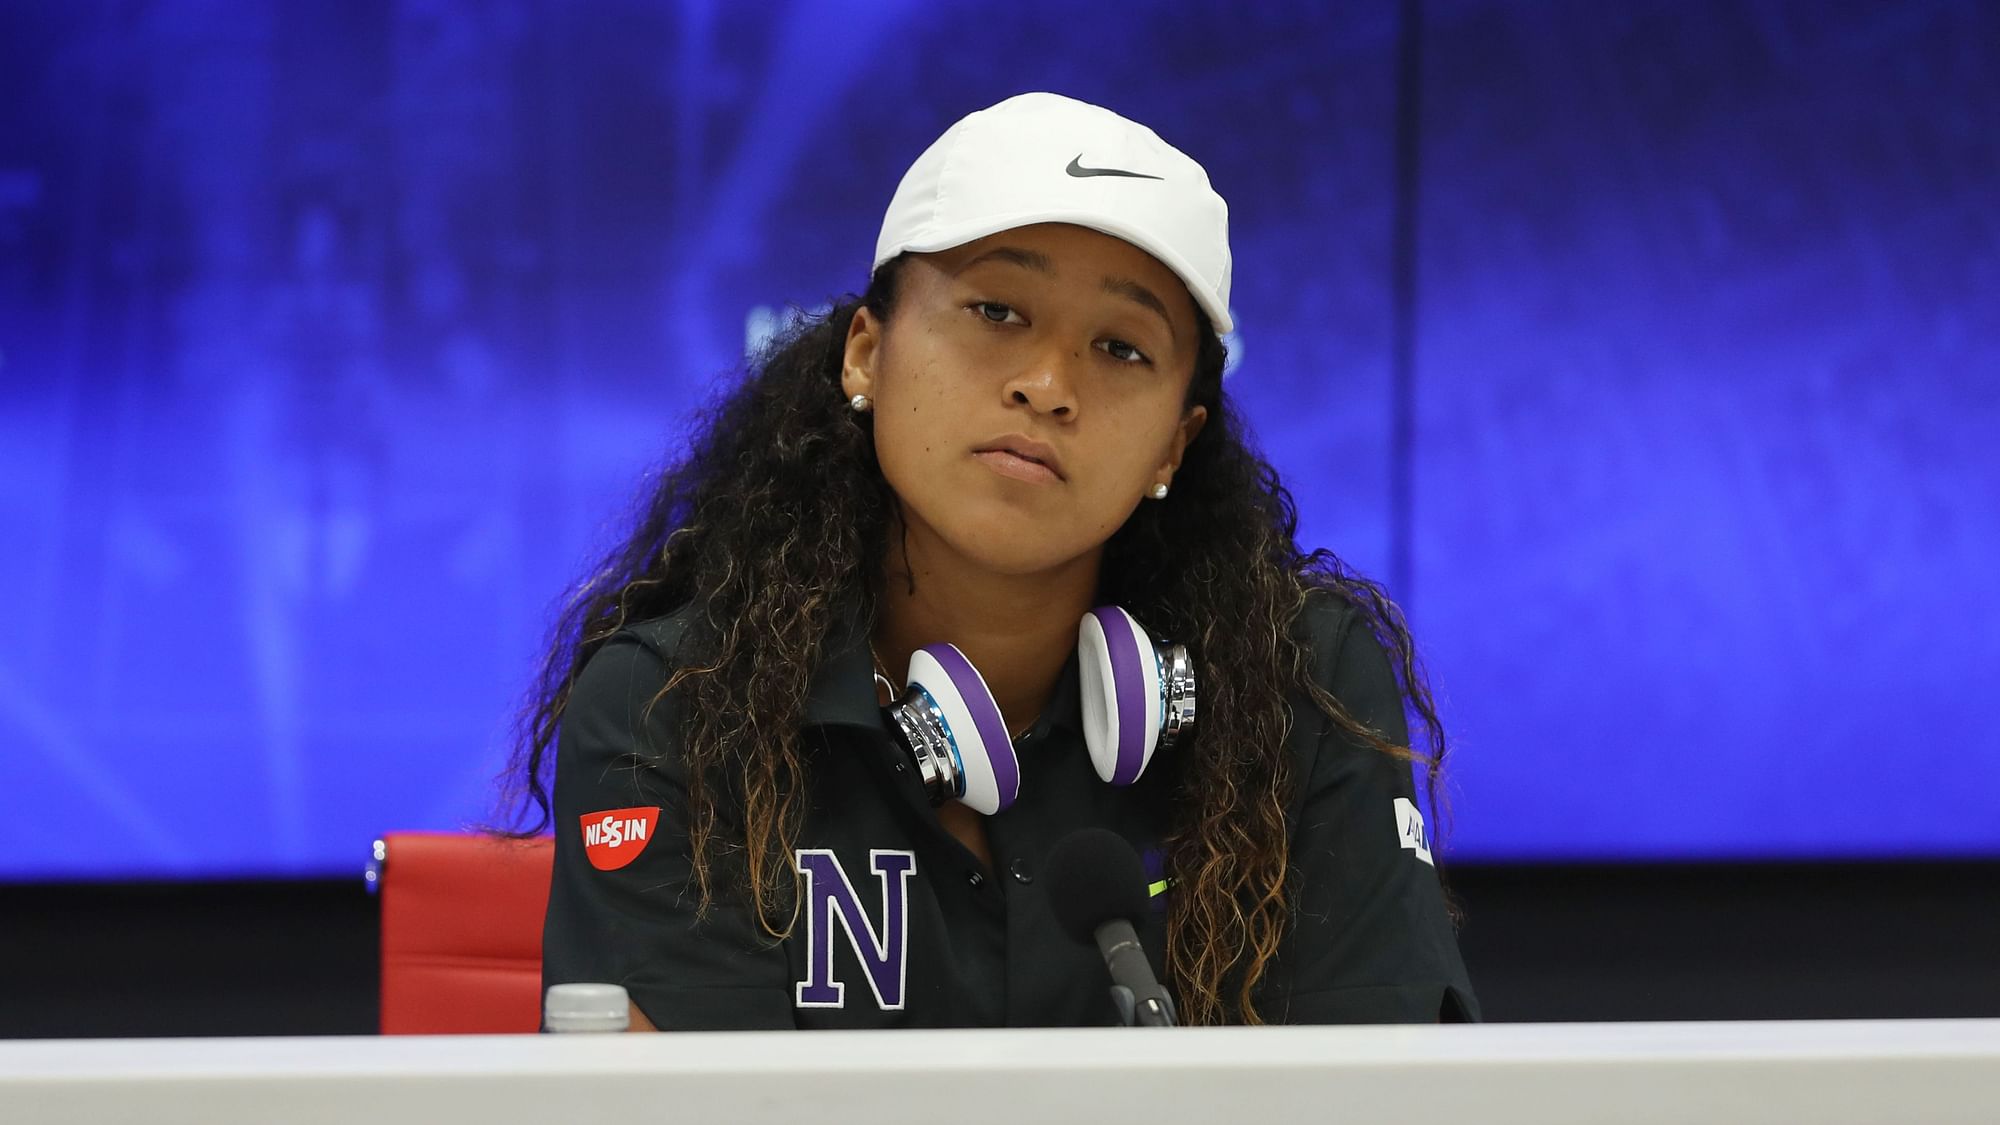 Rising tennis star Naomi Osaka has withdrawn from her semi-final clash at the Western and Southern Open to protest the shooting of Jacob Blake and other victims of police brutality.